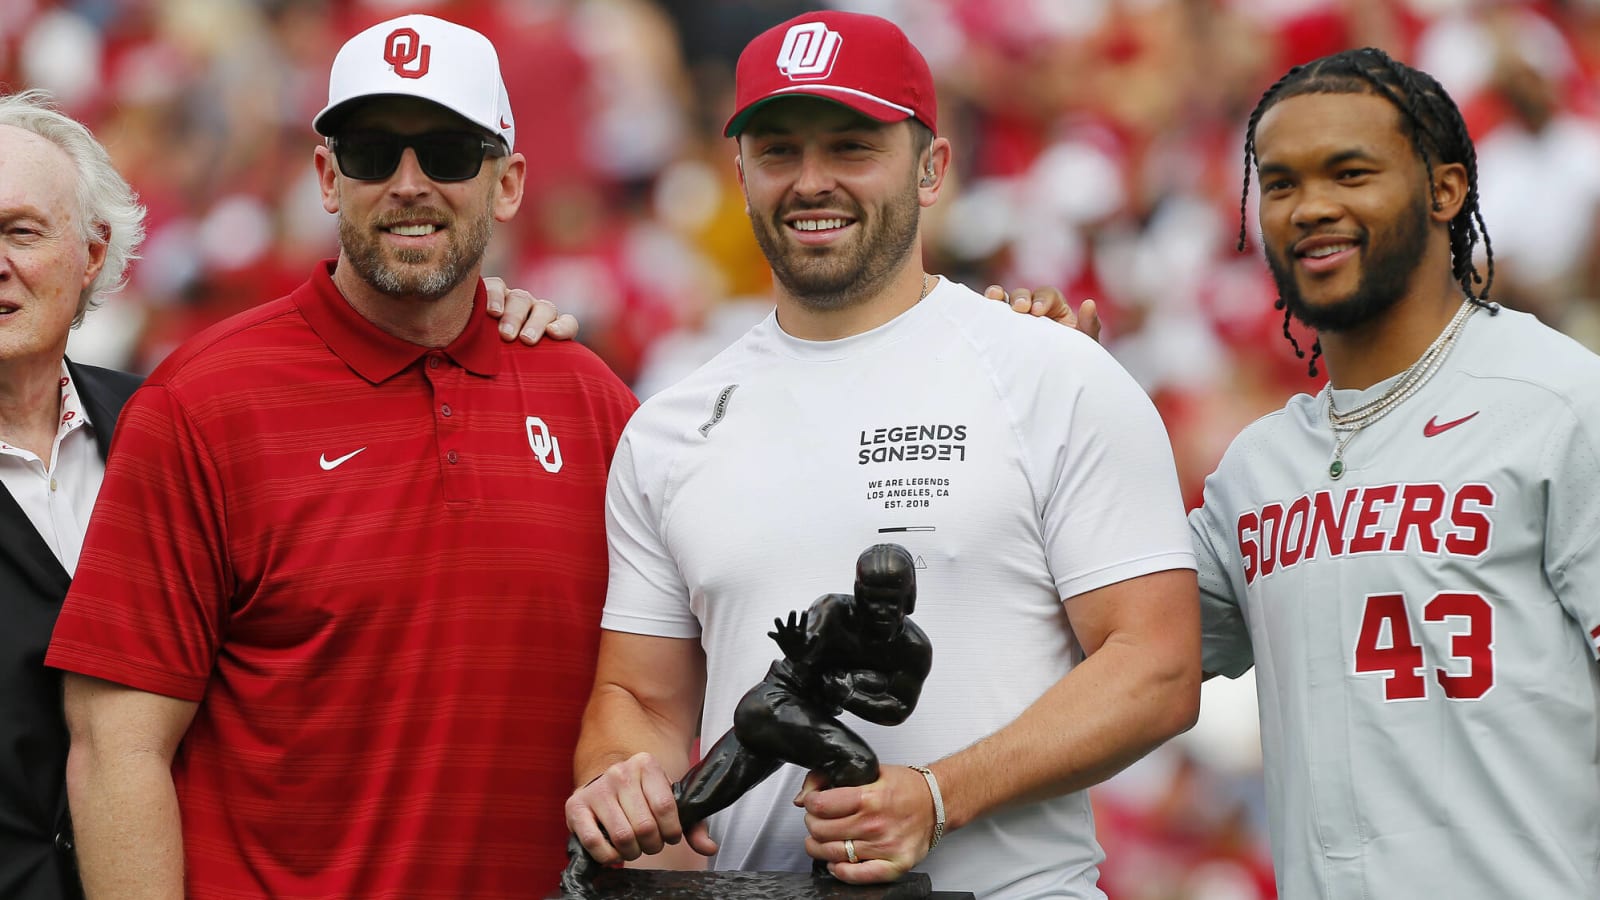 The atmosphere was great': Sooner fans show out for their ranked squad